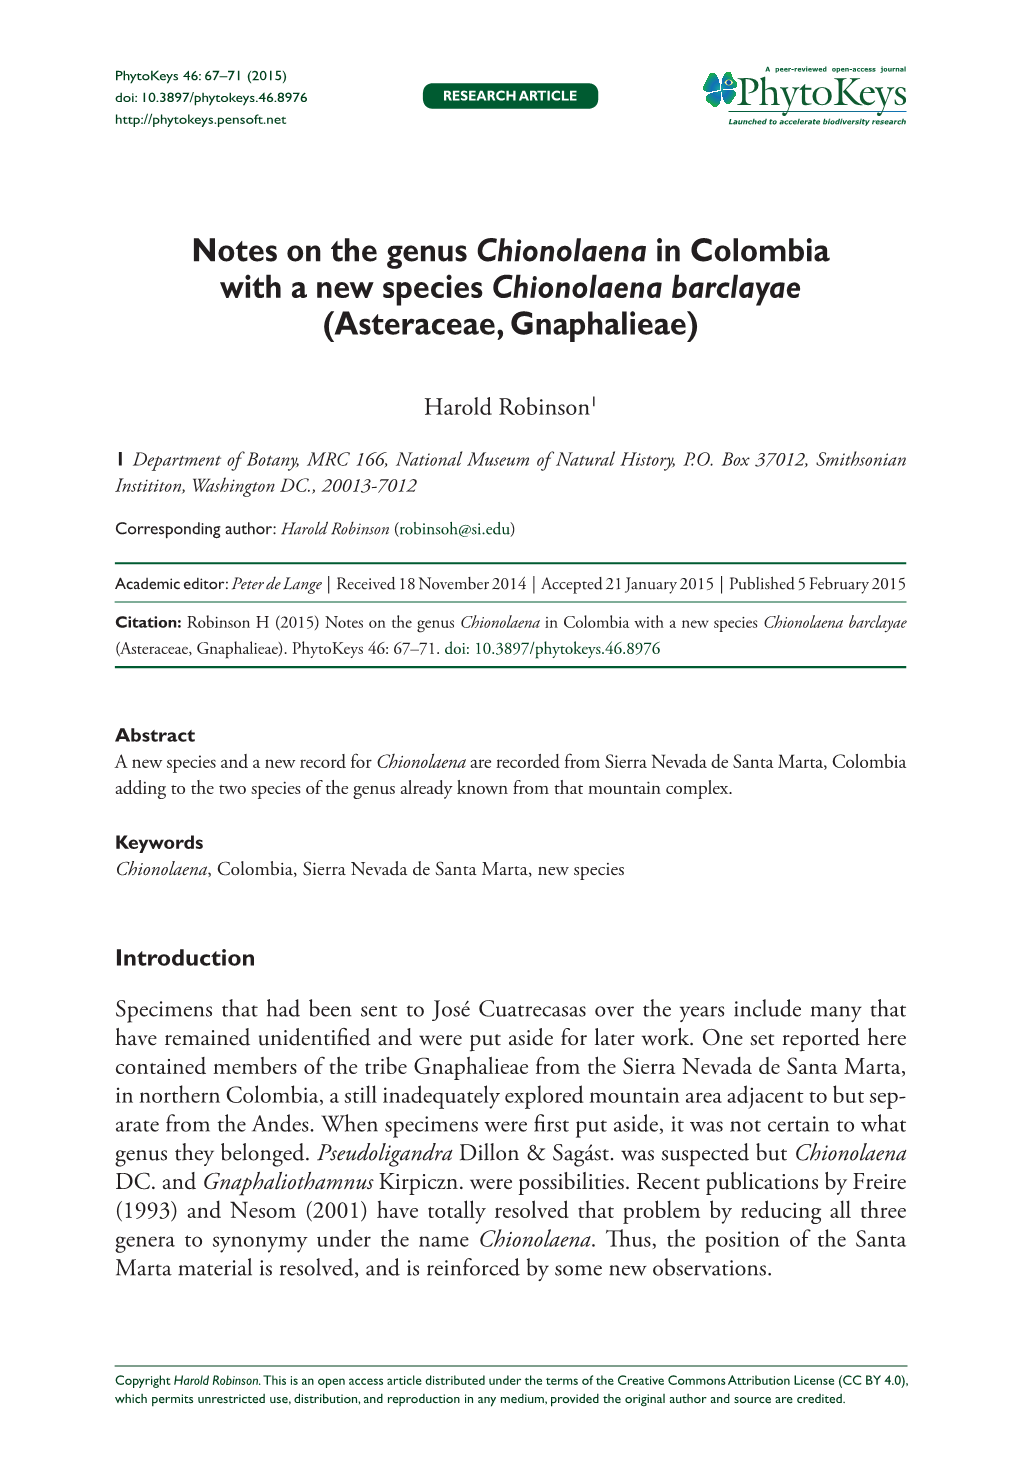 Notes on the Genus Chionolaena in Colombia with a New Species Chionolaena Barclayae (Asteraceae, Gnaphalieae)